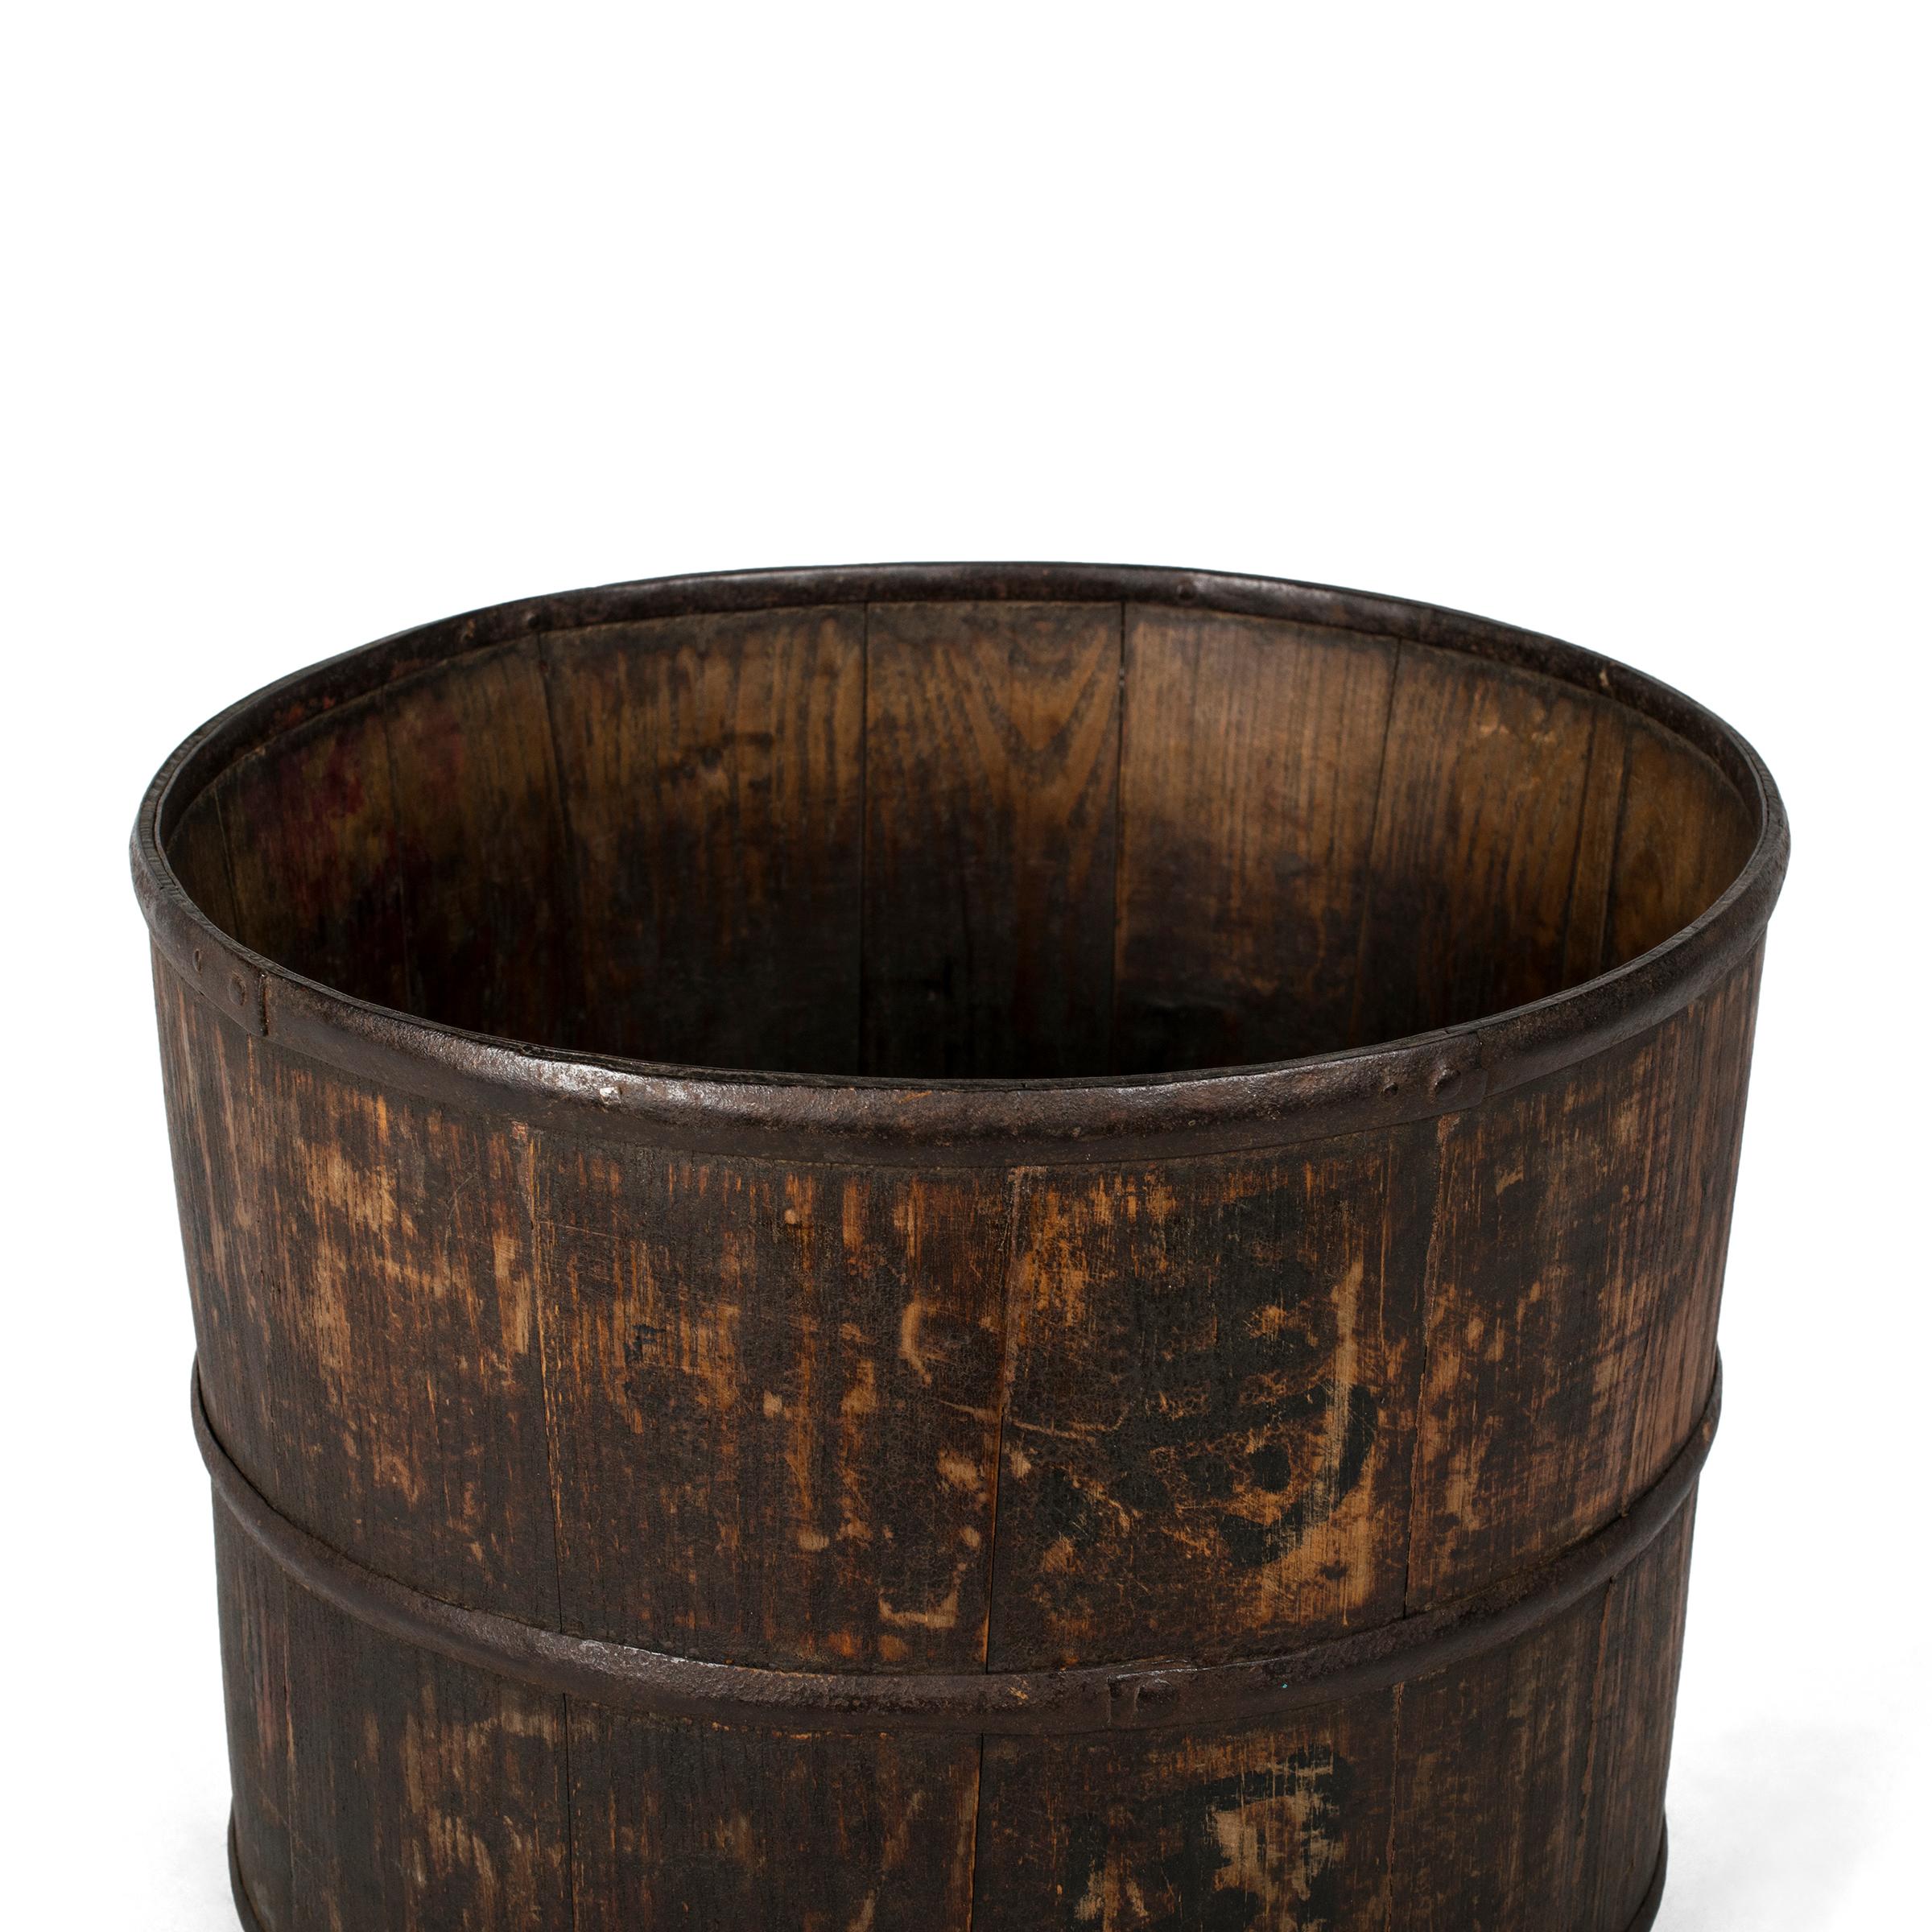 This vintage water bucket has a beautiful patina that can only be achieved with time - a look that contemporary designers often attempt to recreate. The beauty of this water bucket comes from its utilitarian simplicity. Even after years of use the